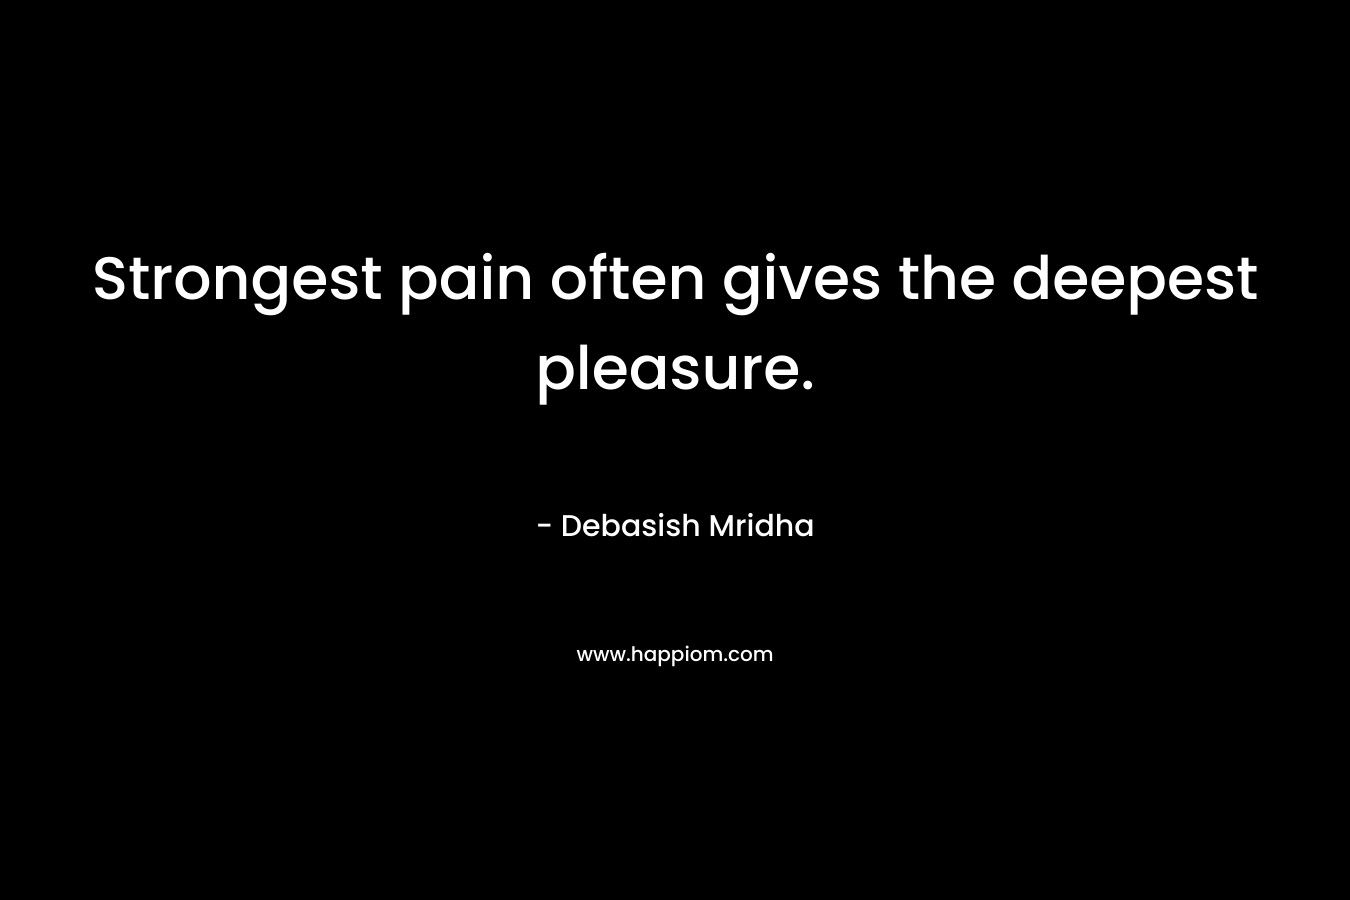 Strongest pain often gives the deepest pleasure.